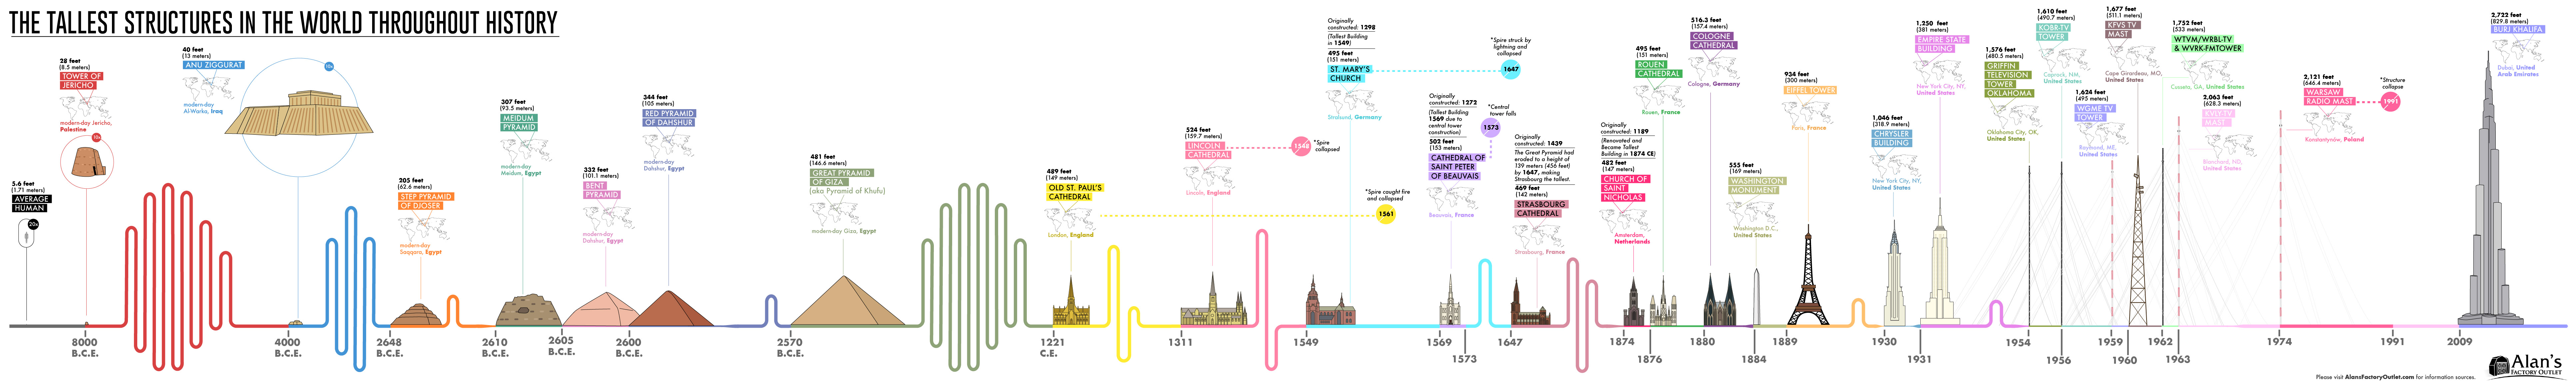 The Tallest Buildings and Structures in the World Throughout History